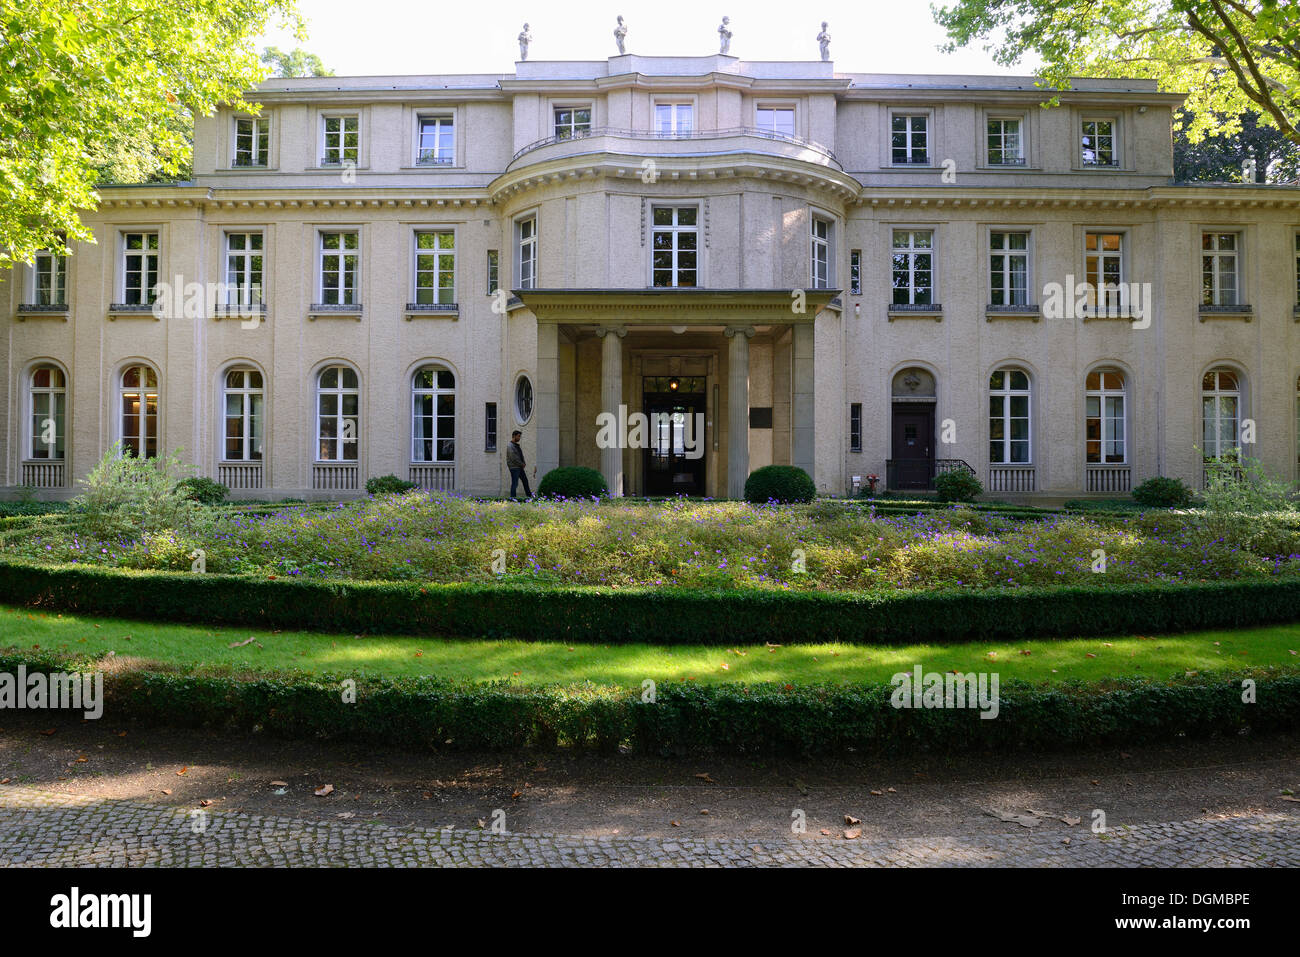 Villa, House of the Wannsee Conference, Am Grossen Wannsee, Wannsee, Zehlendorf, Berlin, Germany Stock Photo